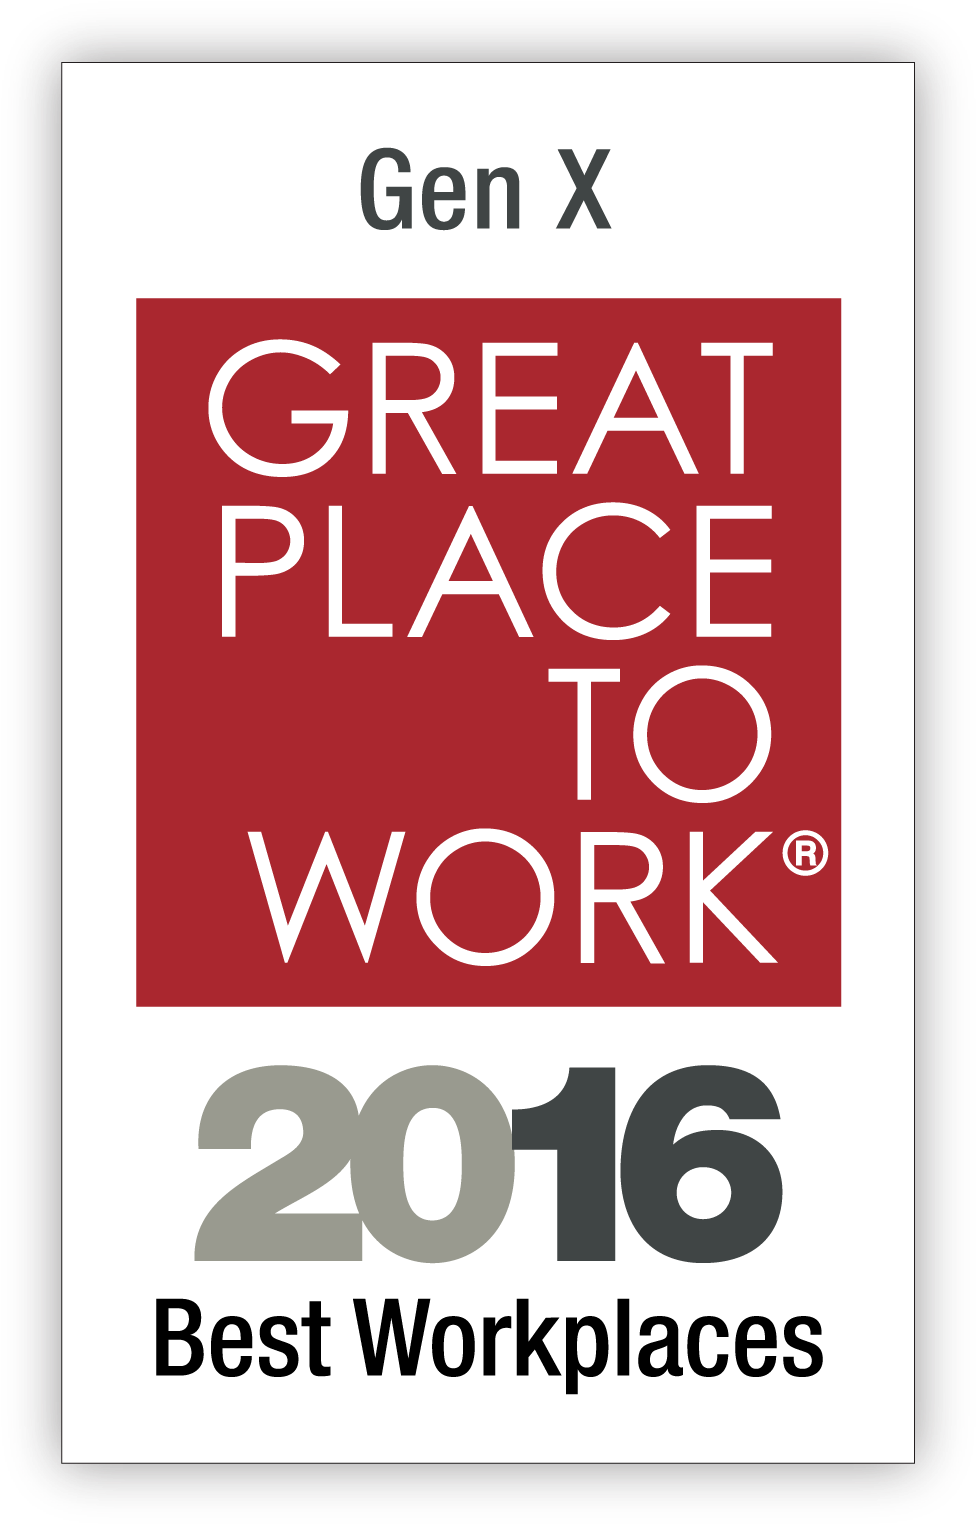 Best Workplaces For Generation X 2016 - Great Place To Work (1200x1793)